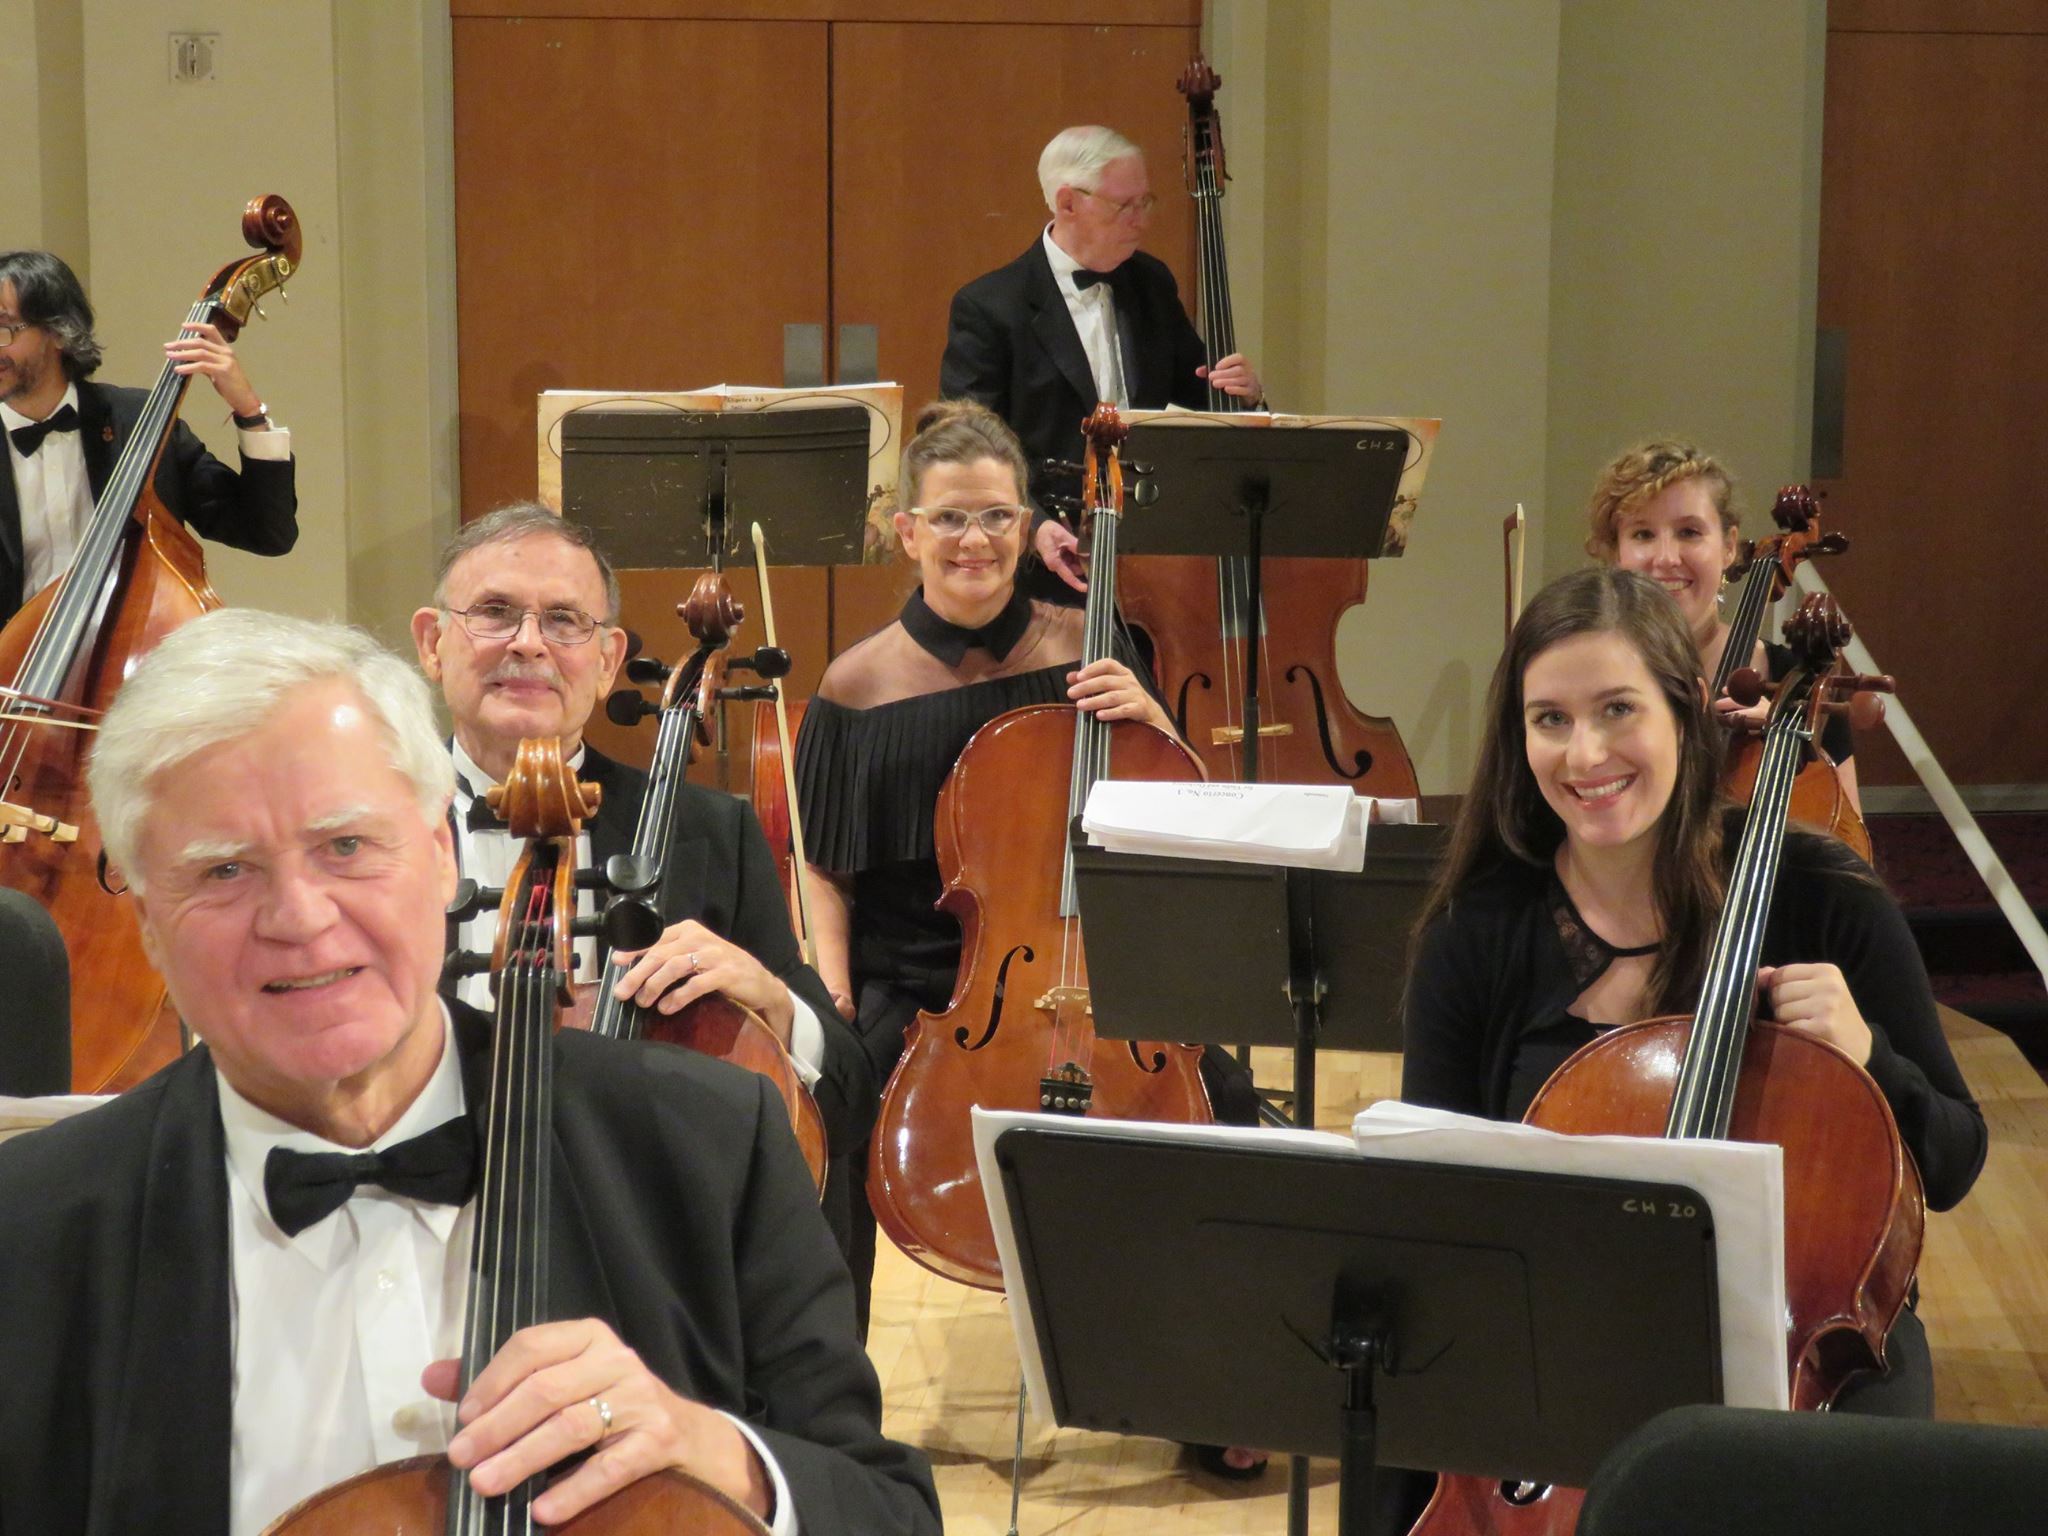 The Cello Section of the Alhambra Orchestra